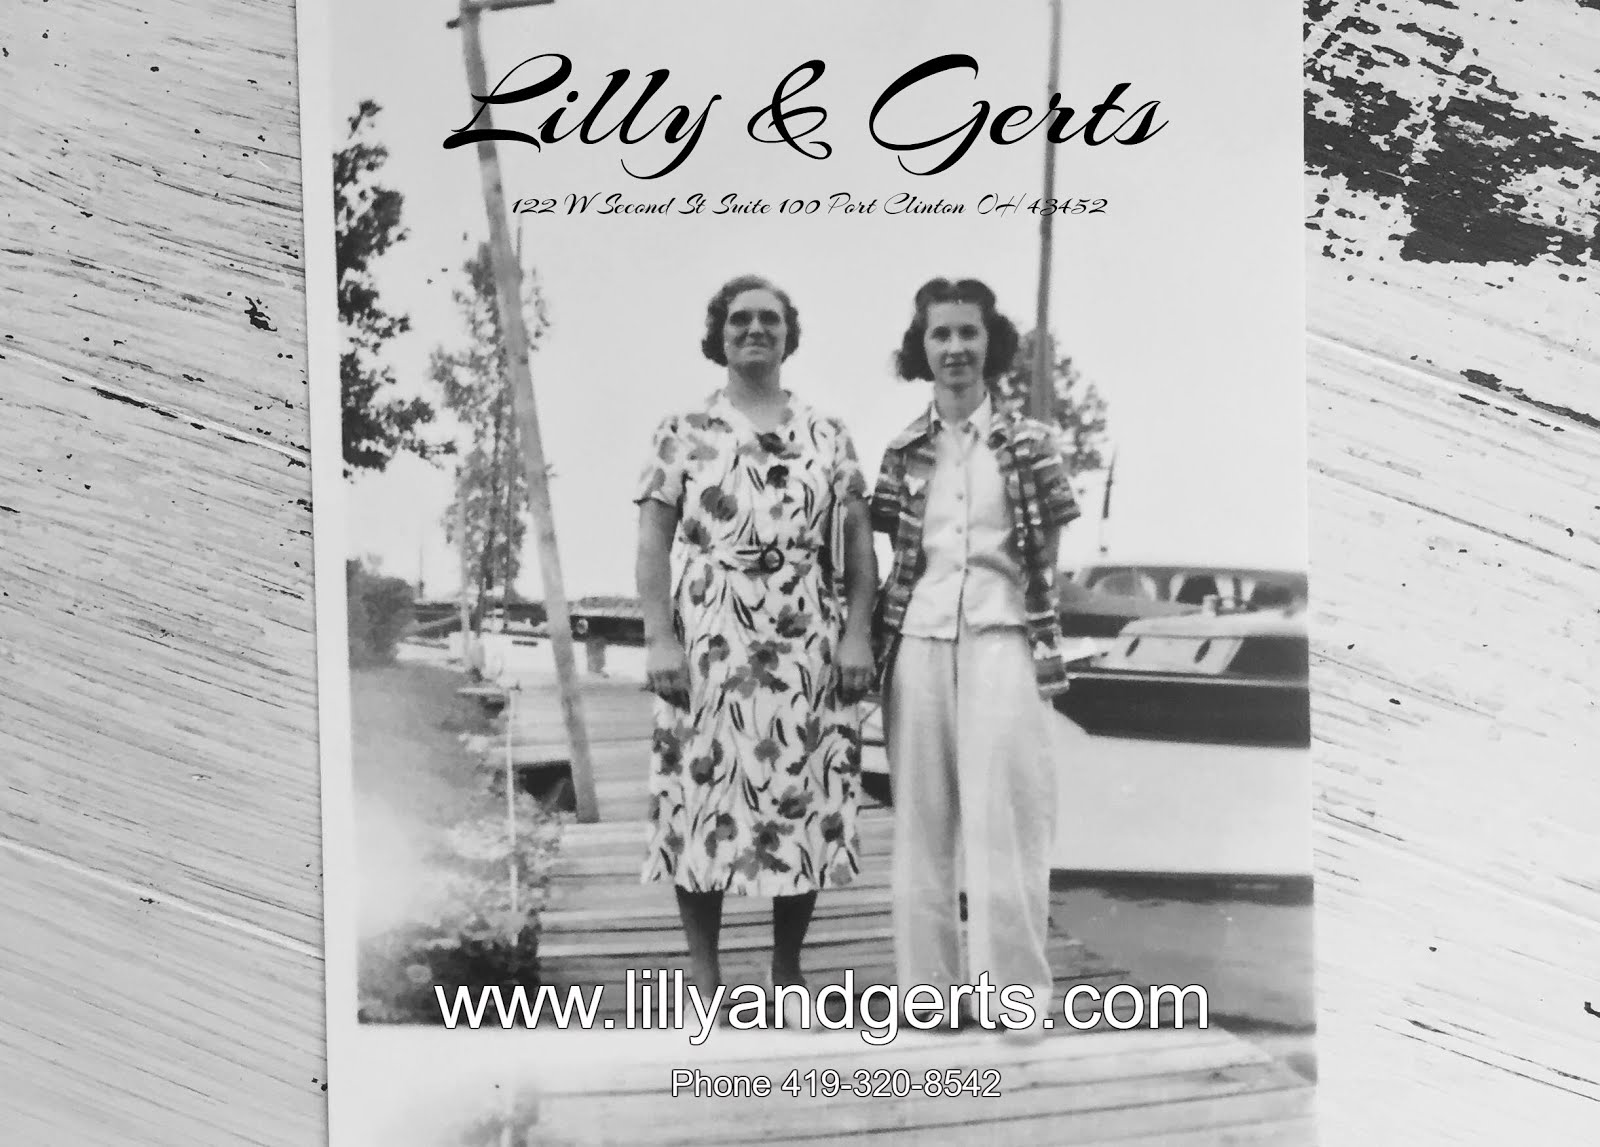 Lilly & Gerts